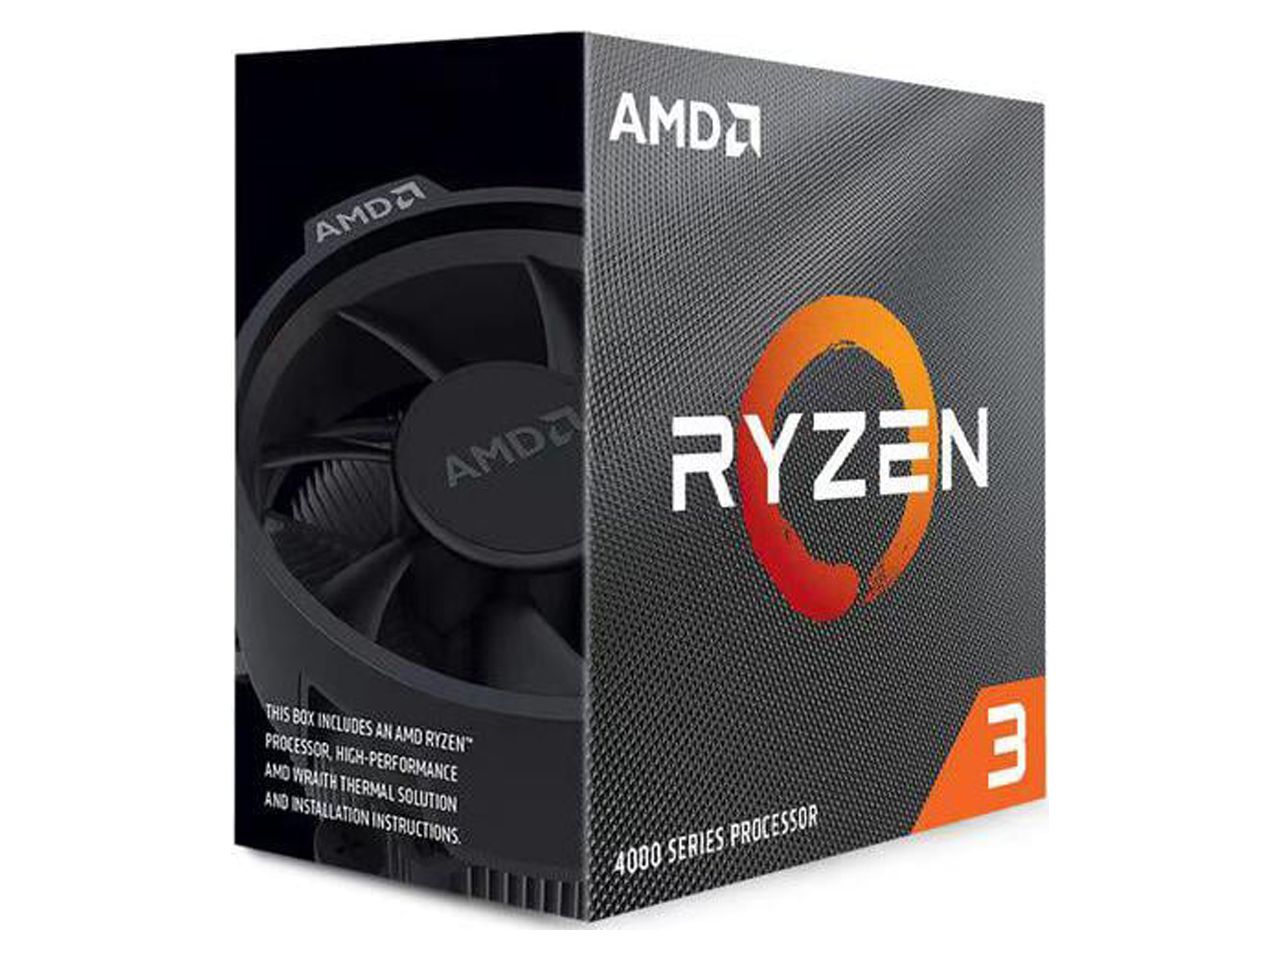 AMD Ryzen 3 4100 3.8Ghz 4-Core AM4 Processor with Wraith Stealth Cooler - 100-100000510BOX - image 2 of 10